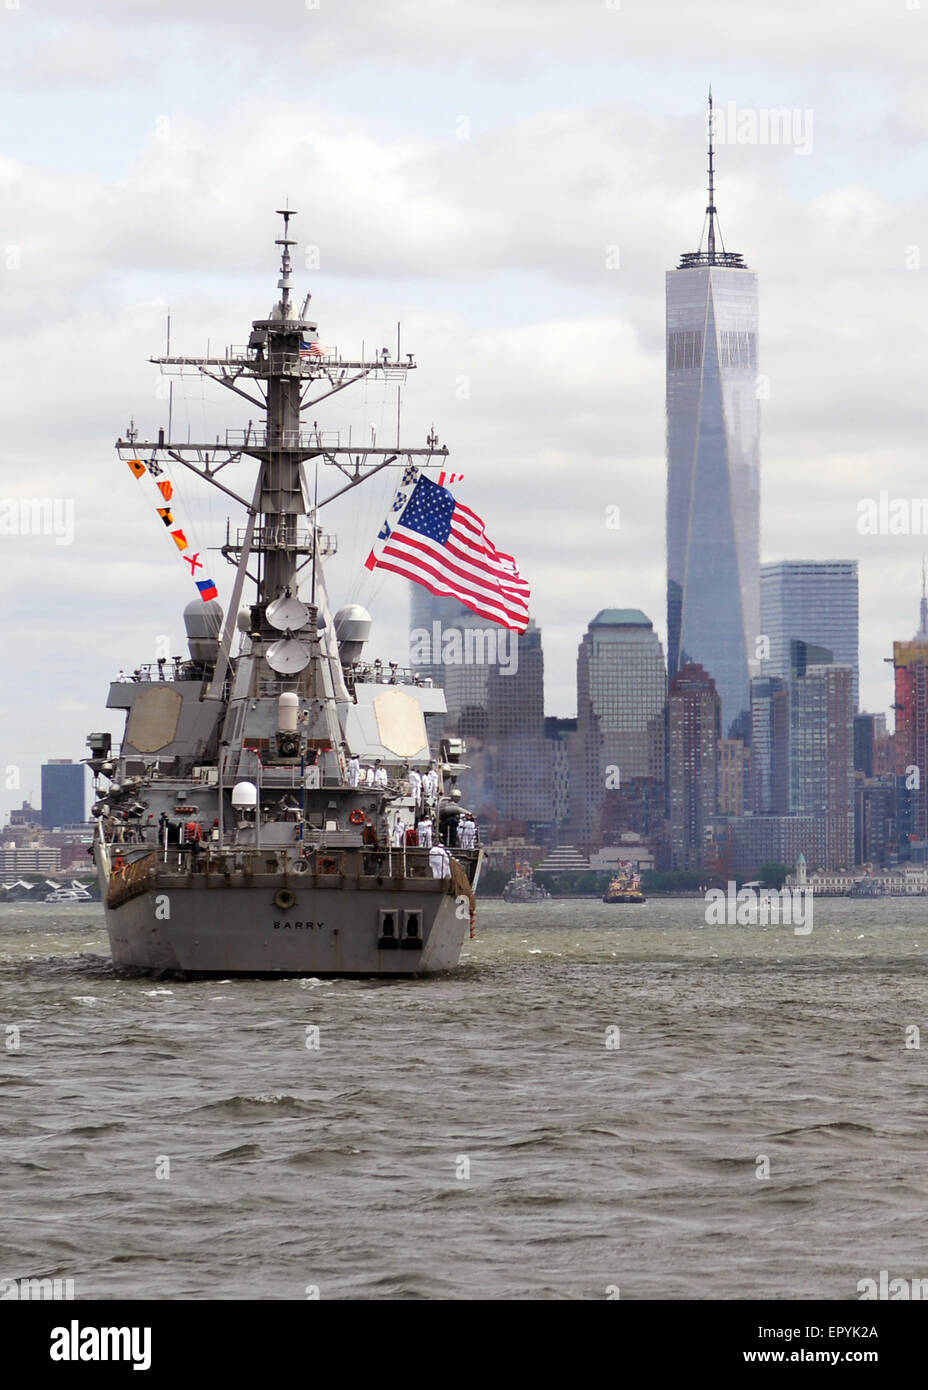 U.S. Navy guided-missile destroyer USS Barry approaches One World Trade Center in downtown Manhattan during the Parade of Ships at Fleet Week May 20, 2015 in New York City, NY. Stock Photo